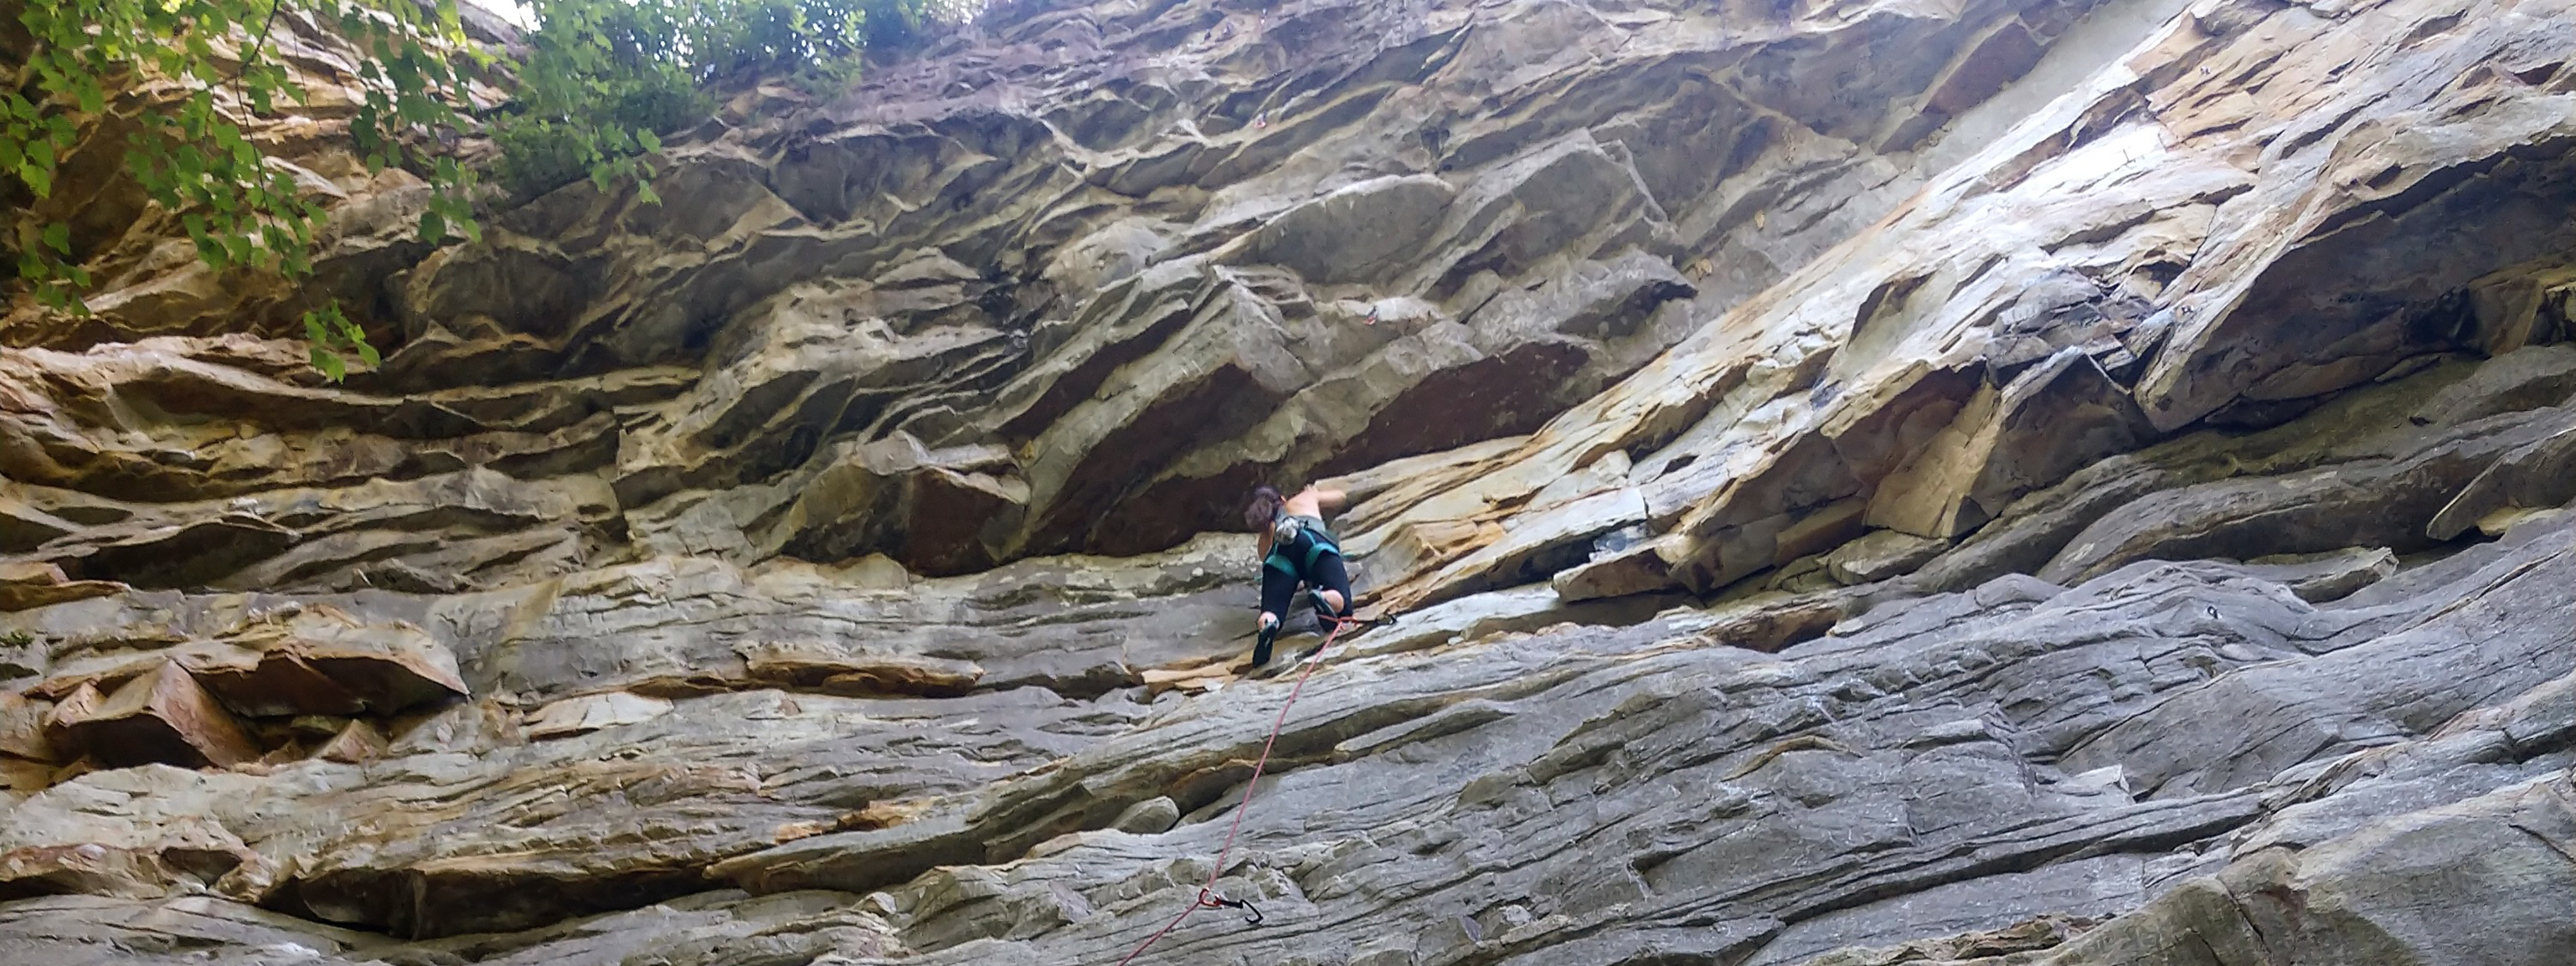 Rappelling and Rock Climbing Safety - Little River Canyon National